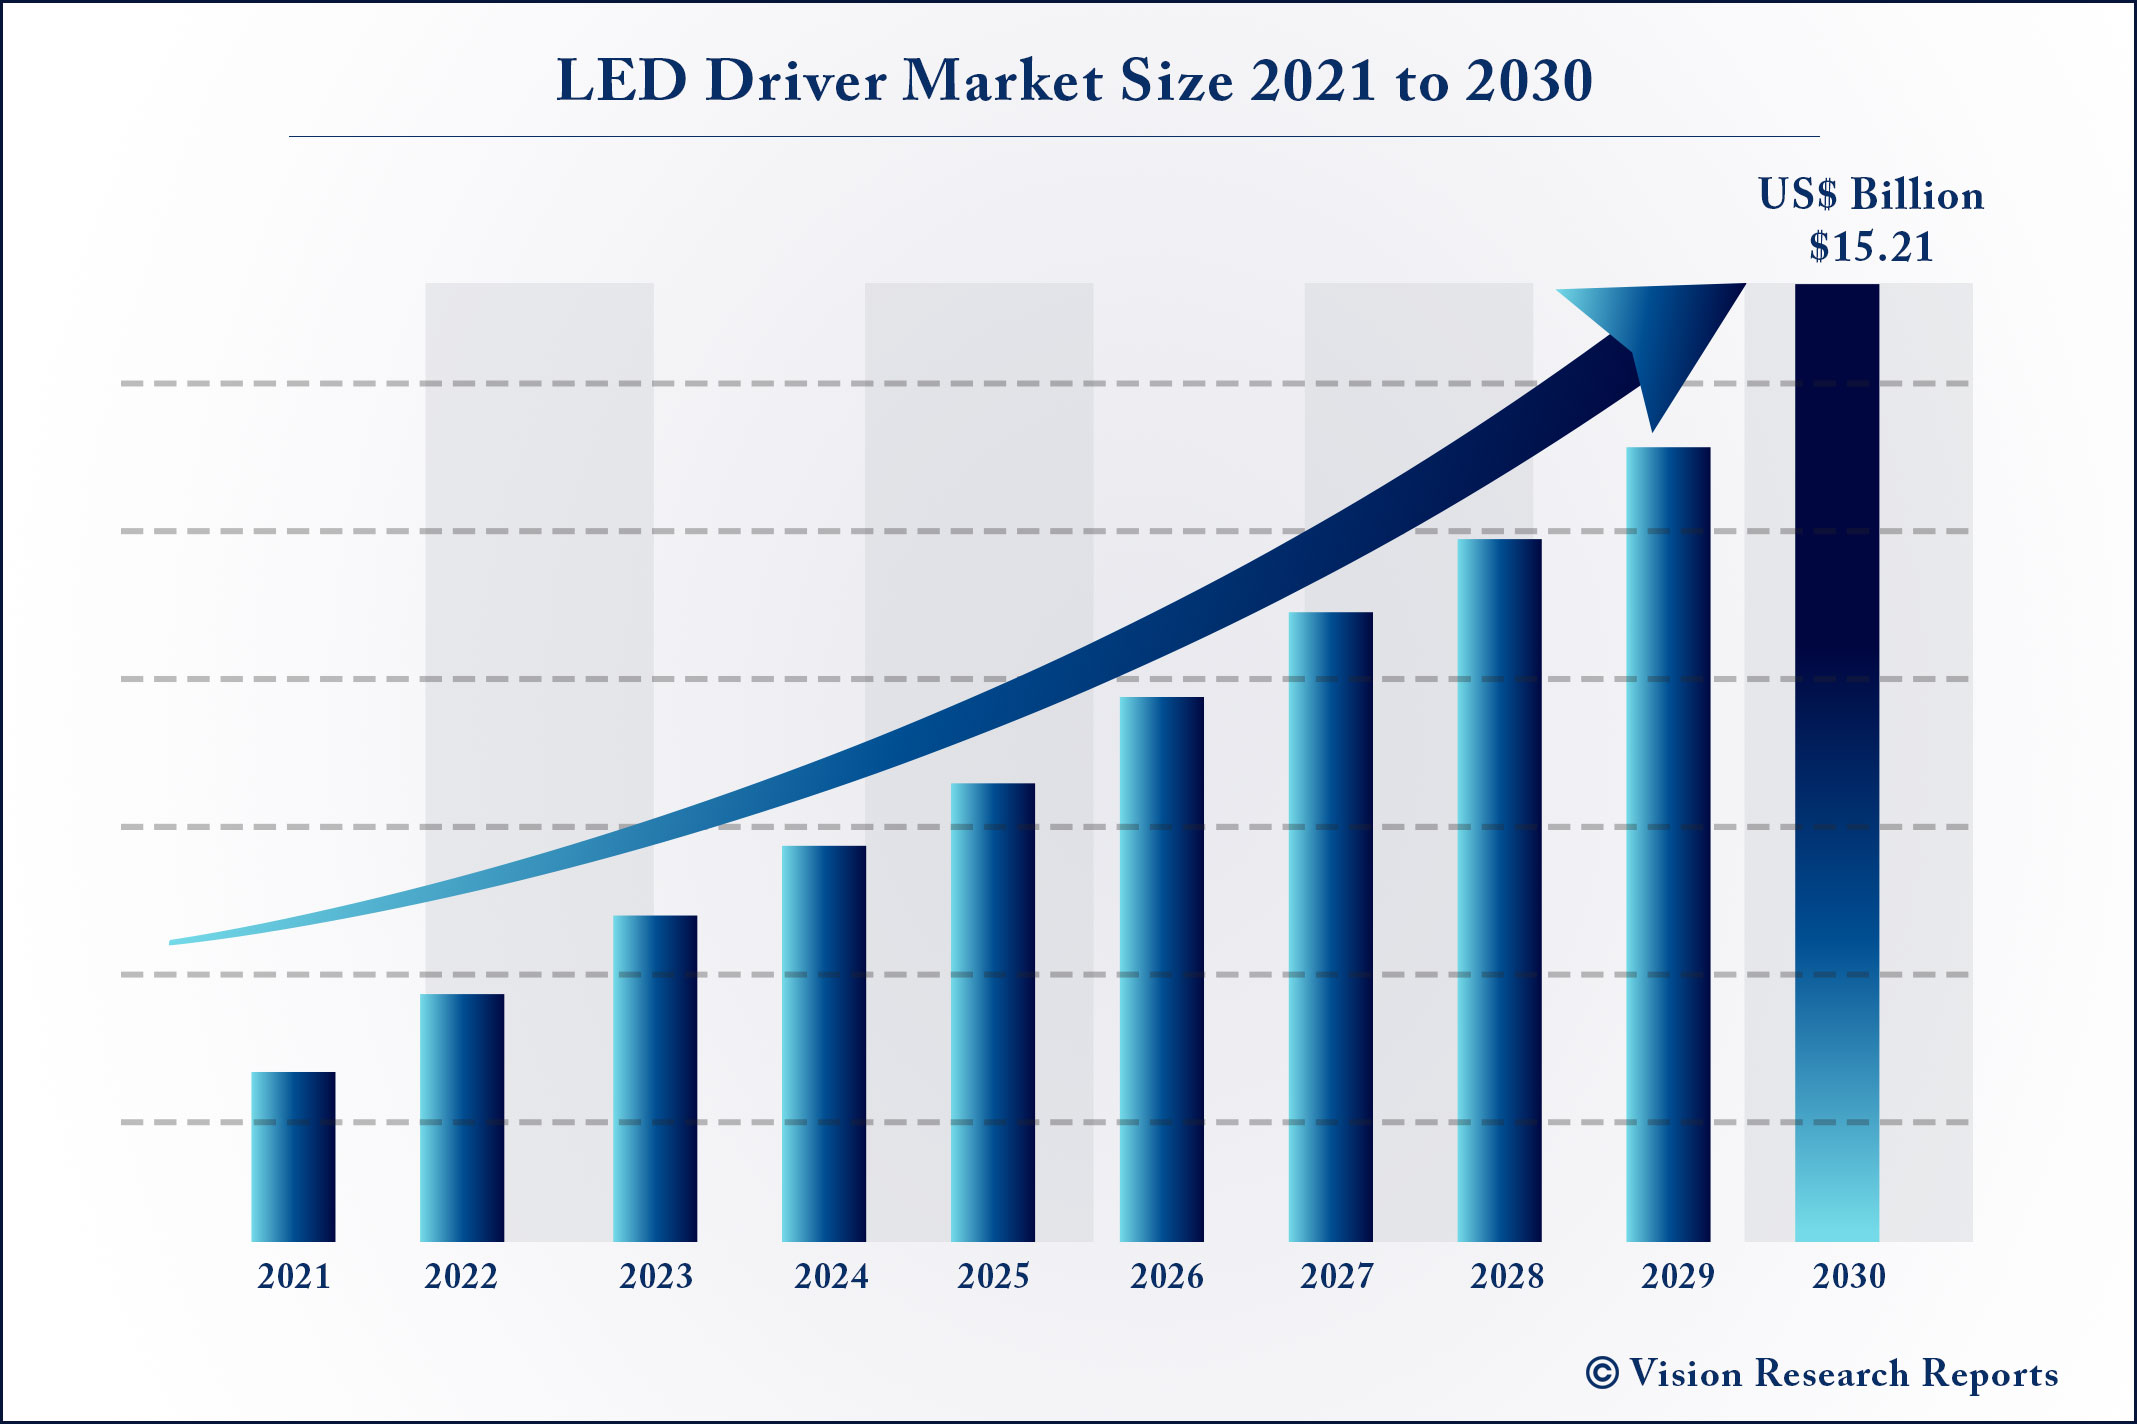 LED Driver Market Size 2021 to 2030